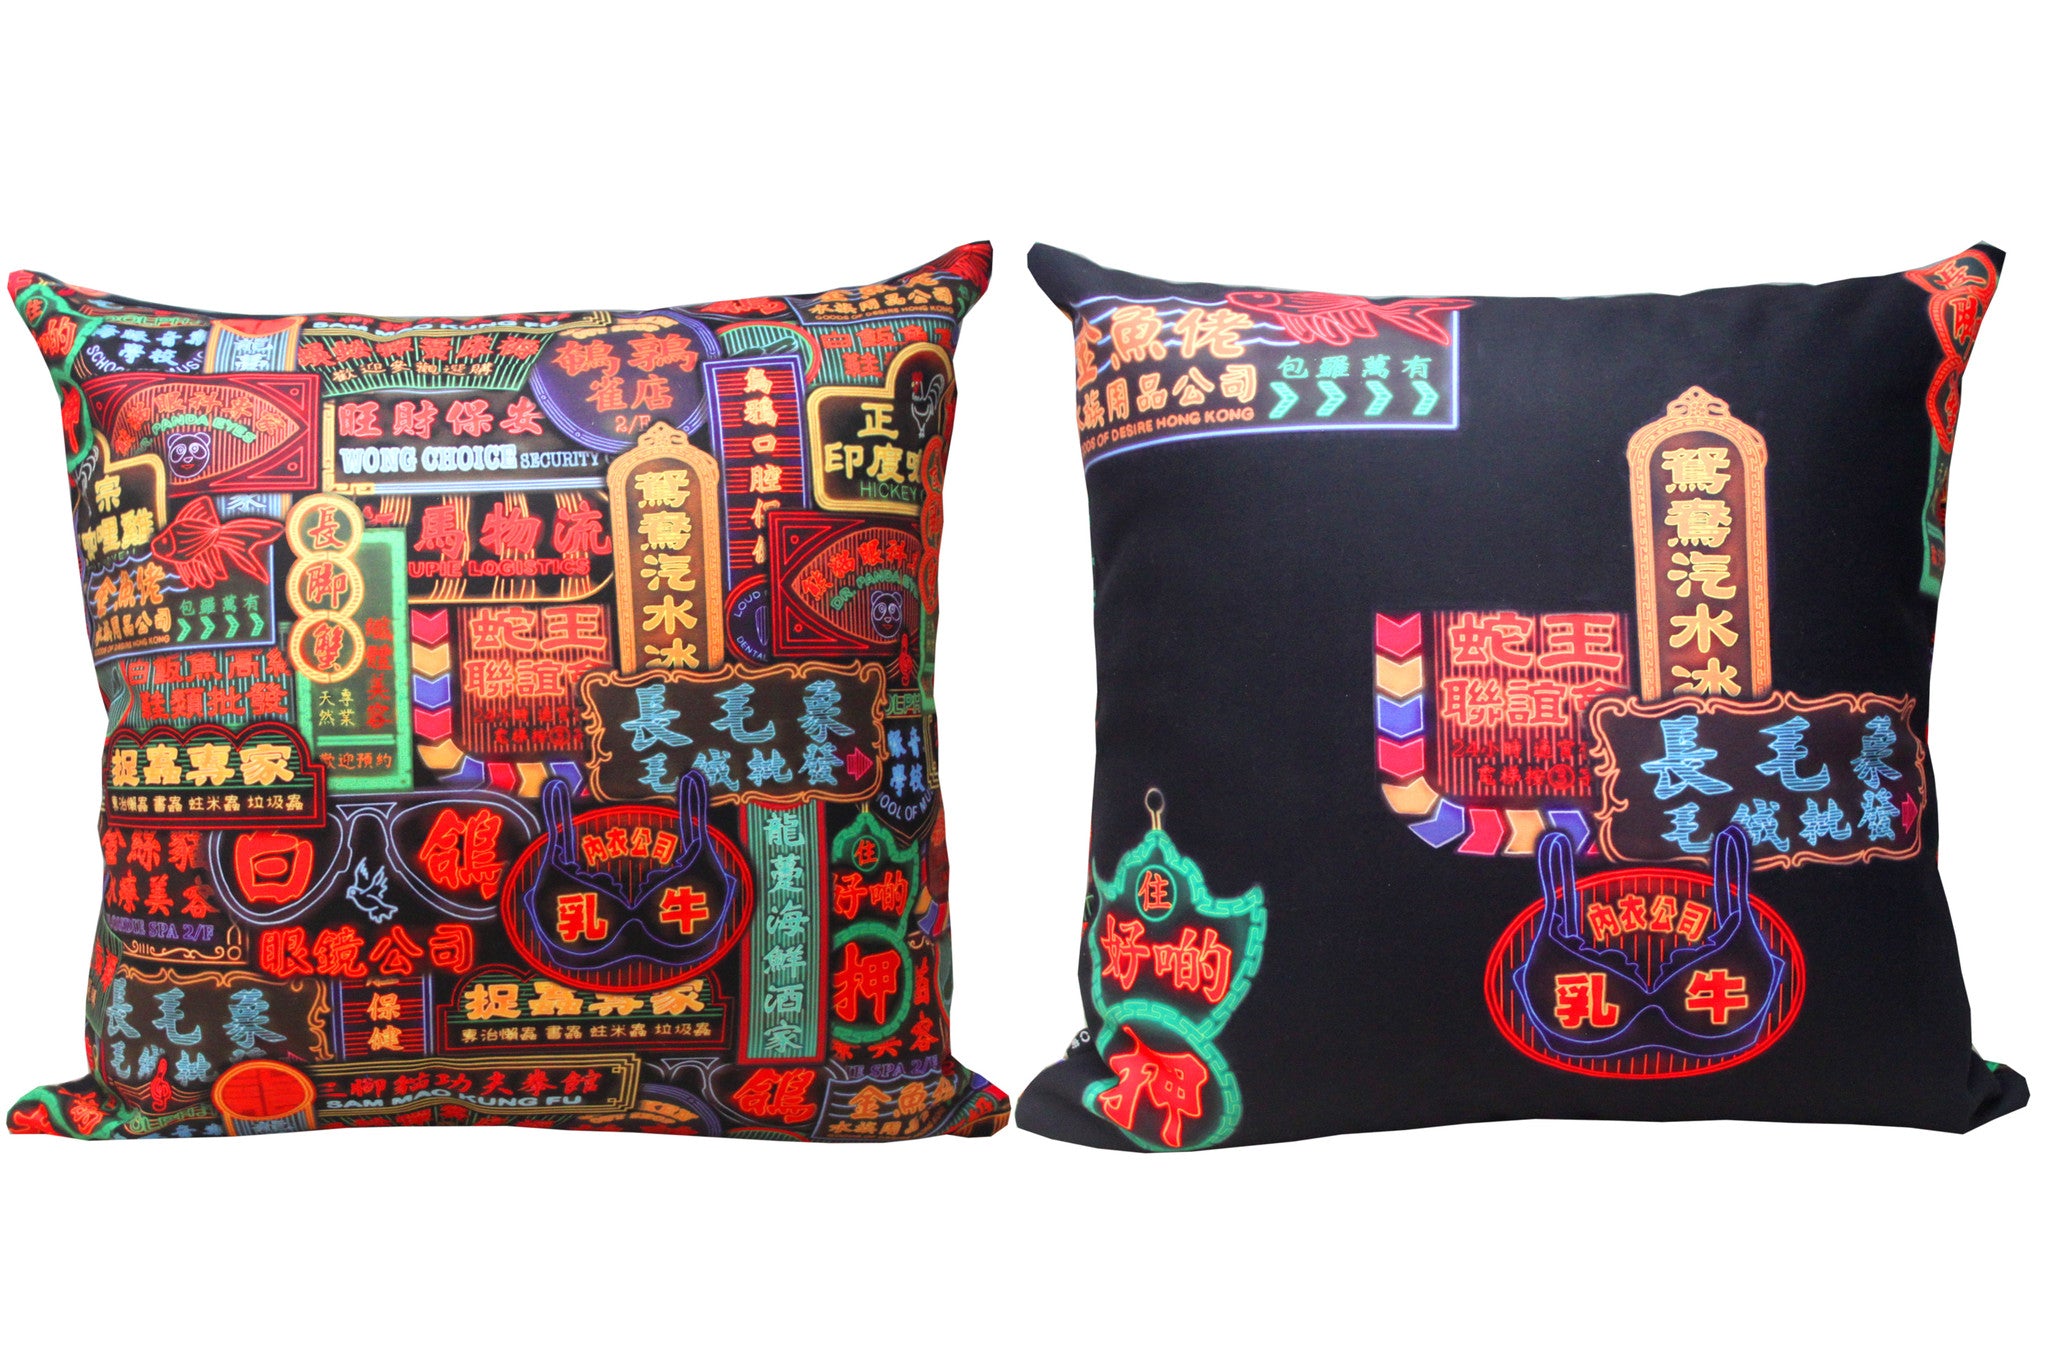 Nathan Road Double-Sided Cushion Cover, 45 x 45 cm